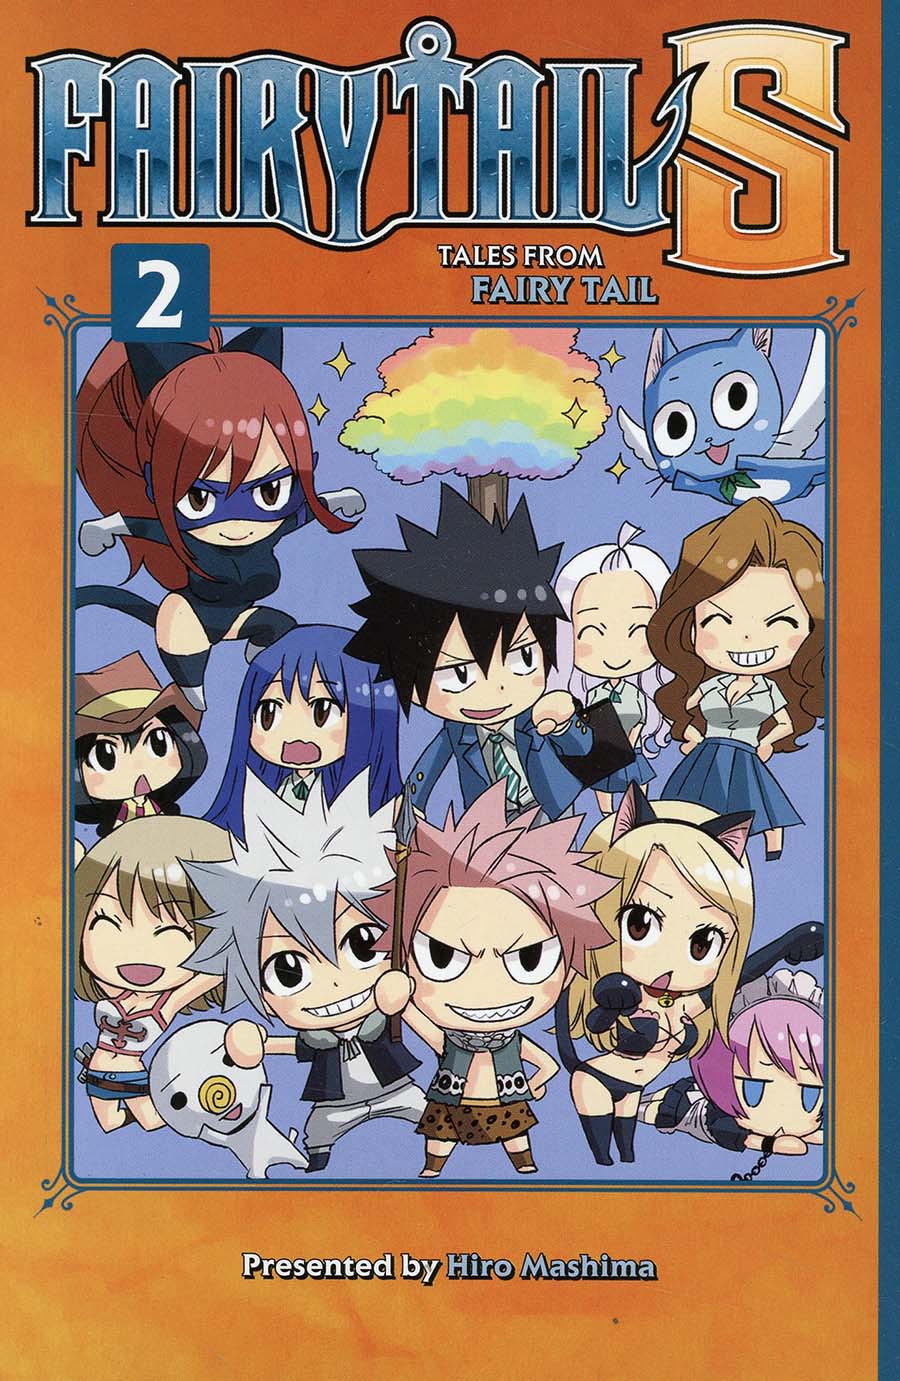 Fairy Tail S Tales From Fairy Tail Vol 2 GN